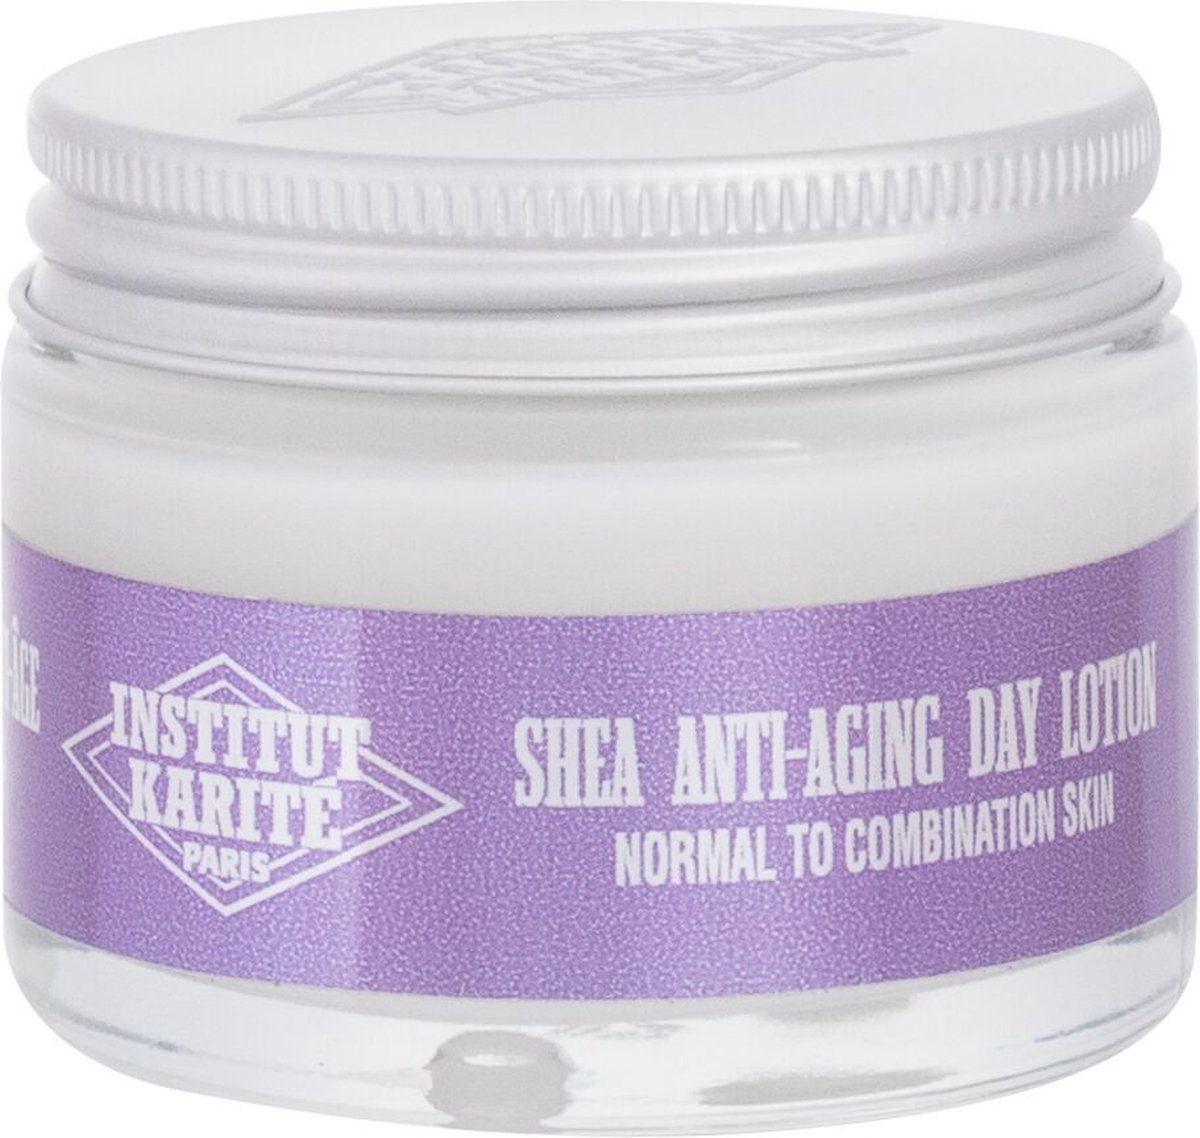 Shea Anti-Aging Day Lotion (Normal to Combination Skin) - Daily skin cream